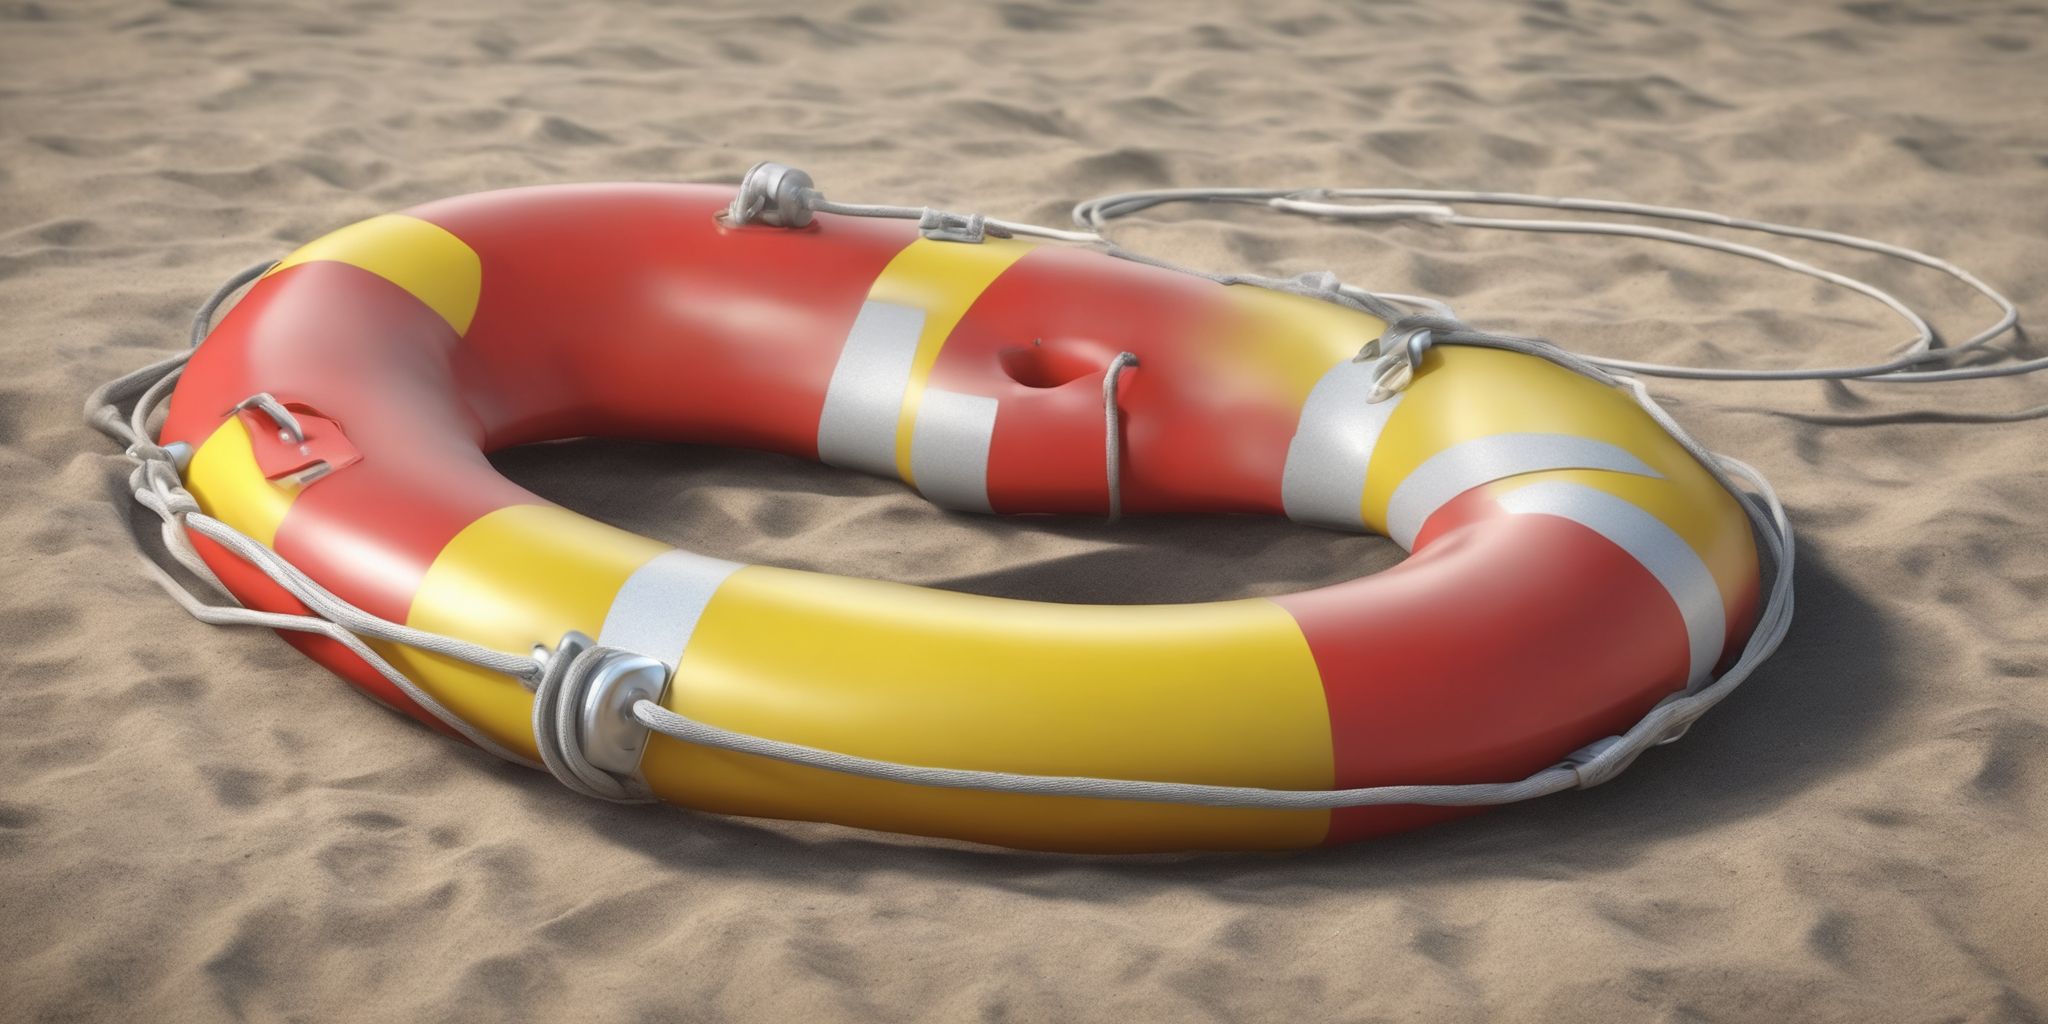 Lifesaver  in realistic, photographic style